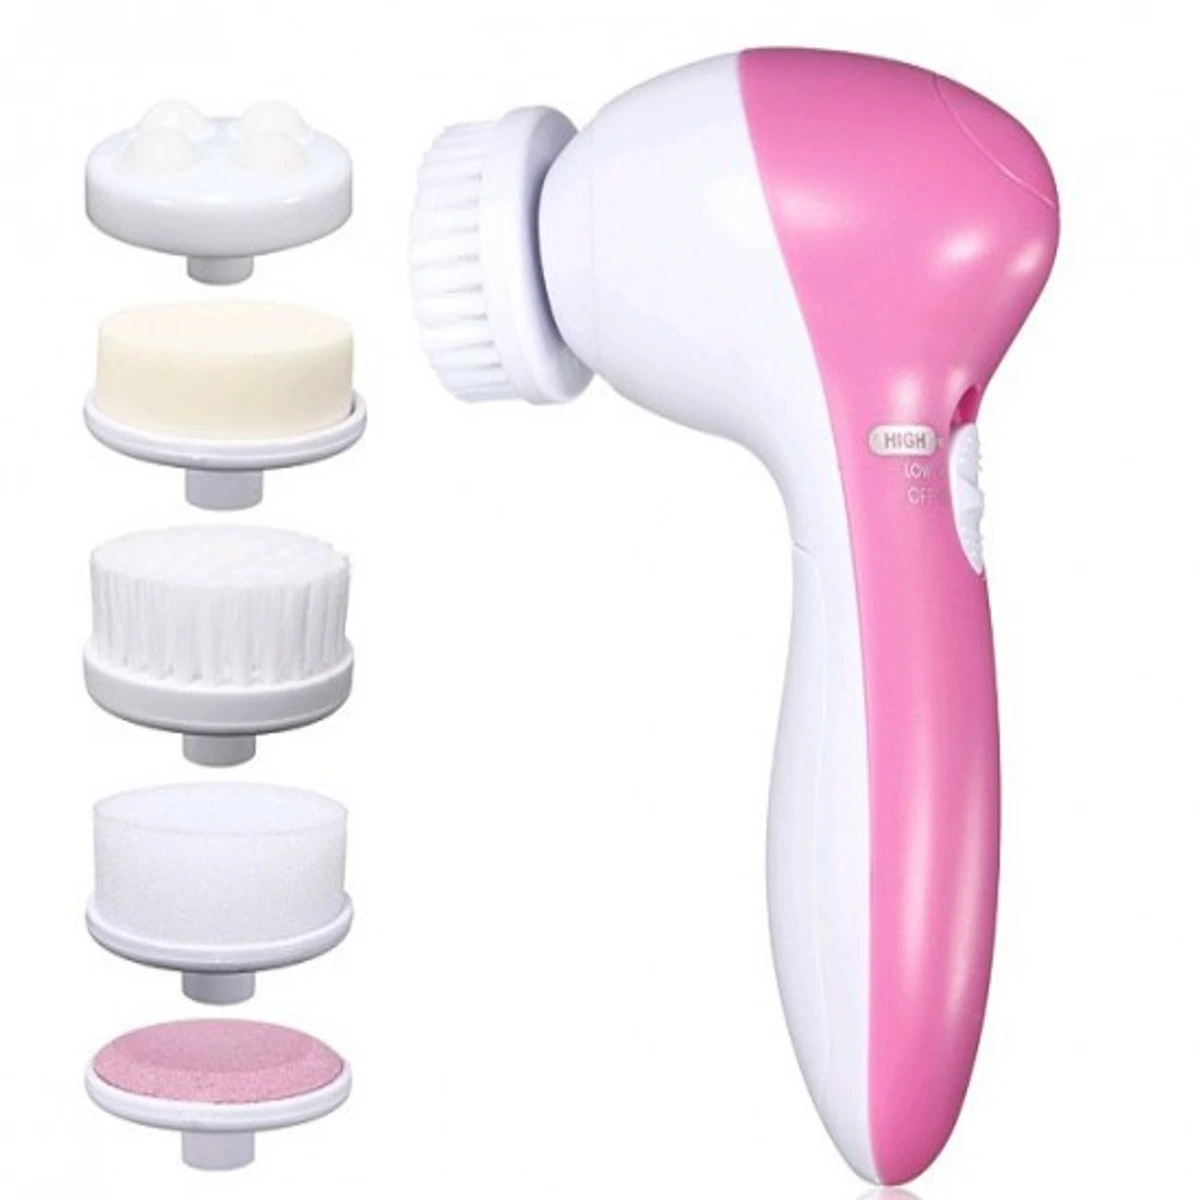 5-in-1 Facial Body Beauty Care Massager Electric Machine Roller for Smooth Skin Face